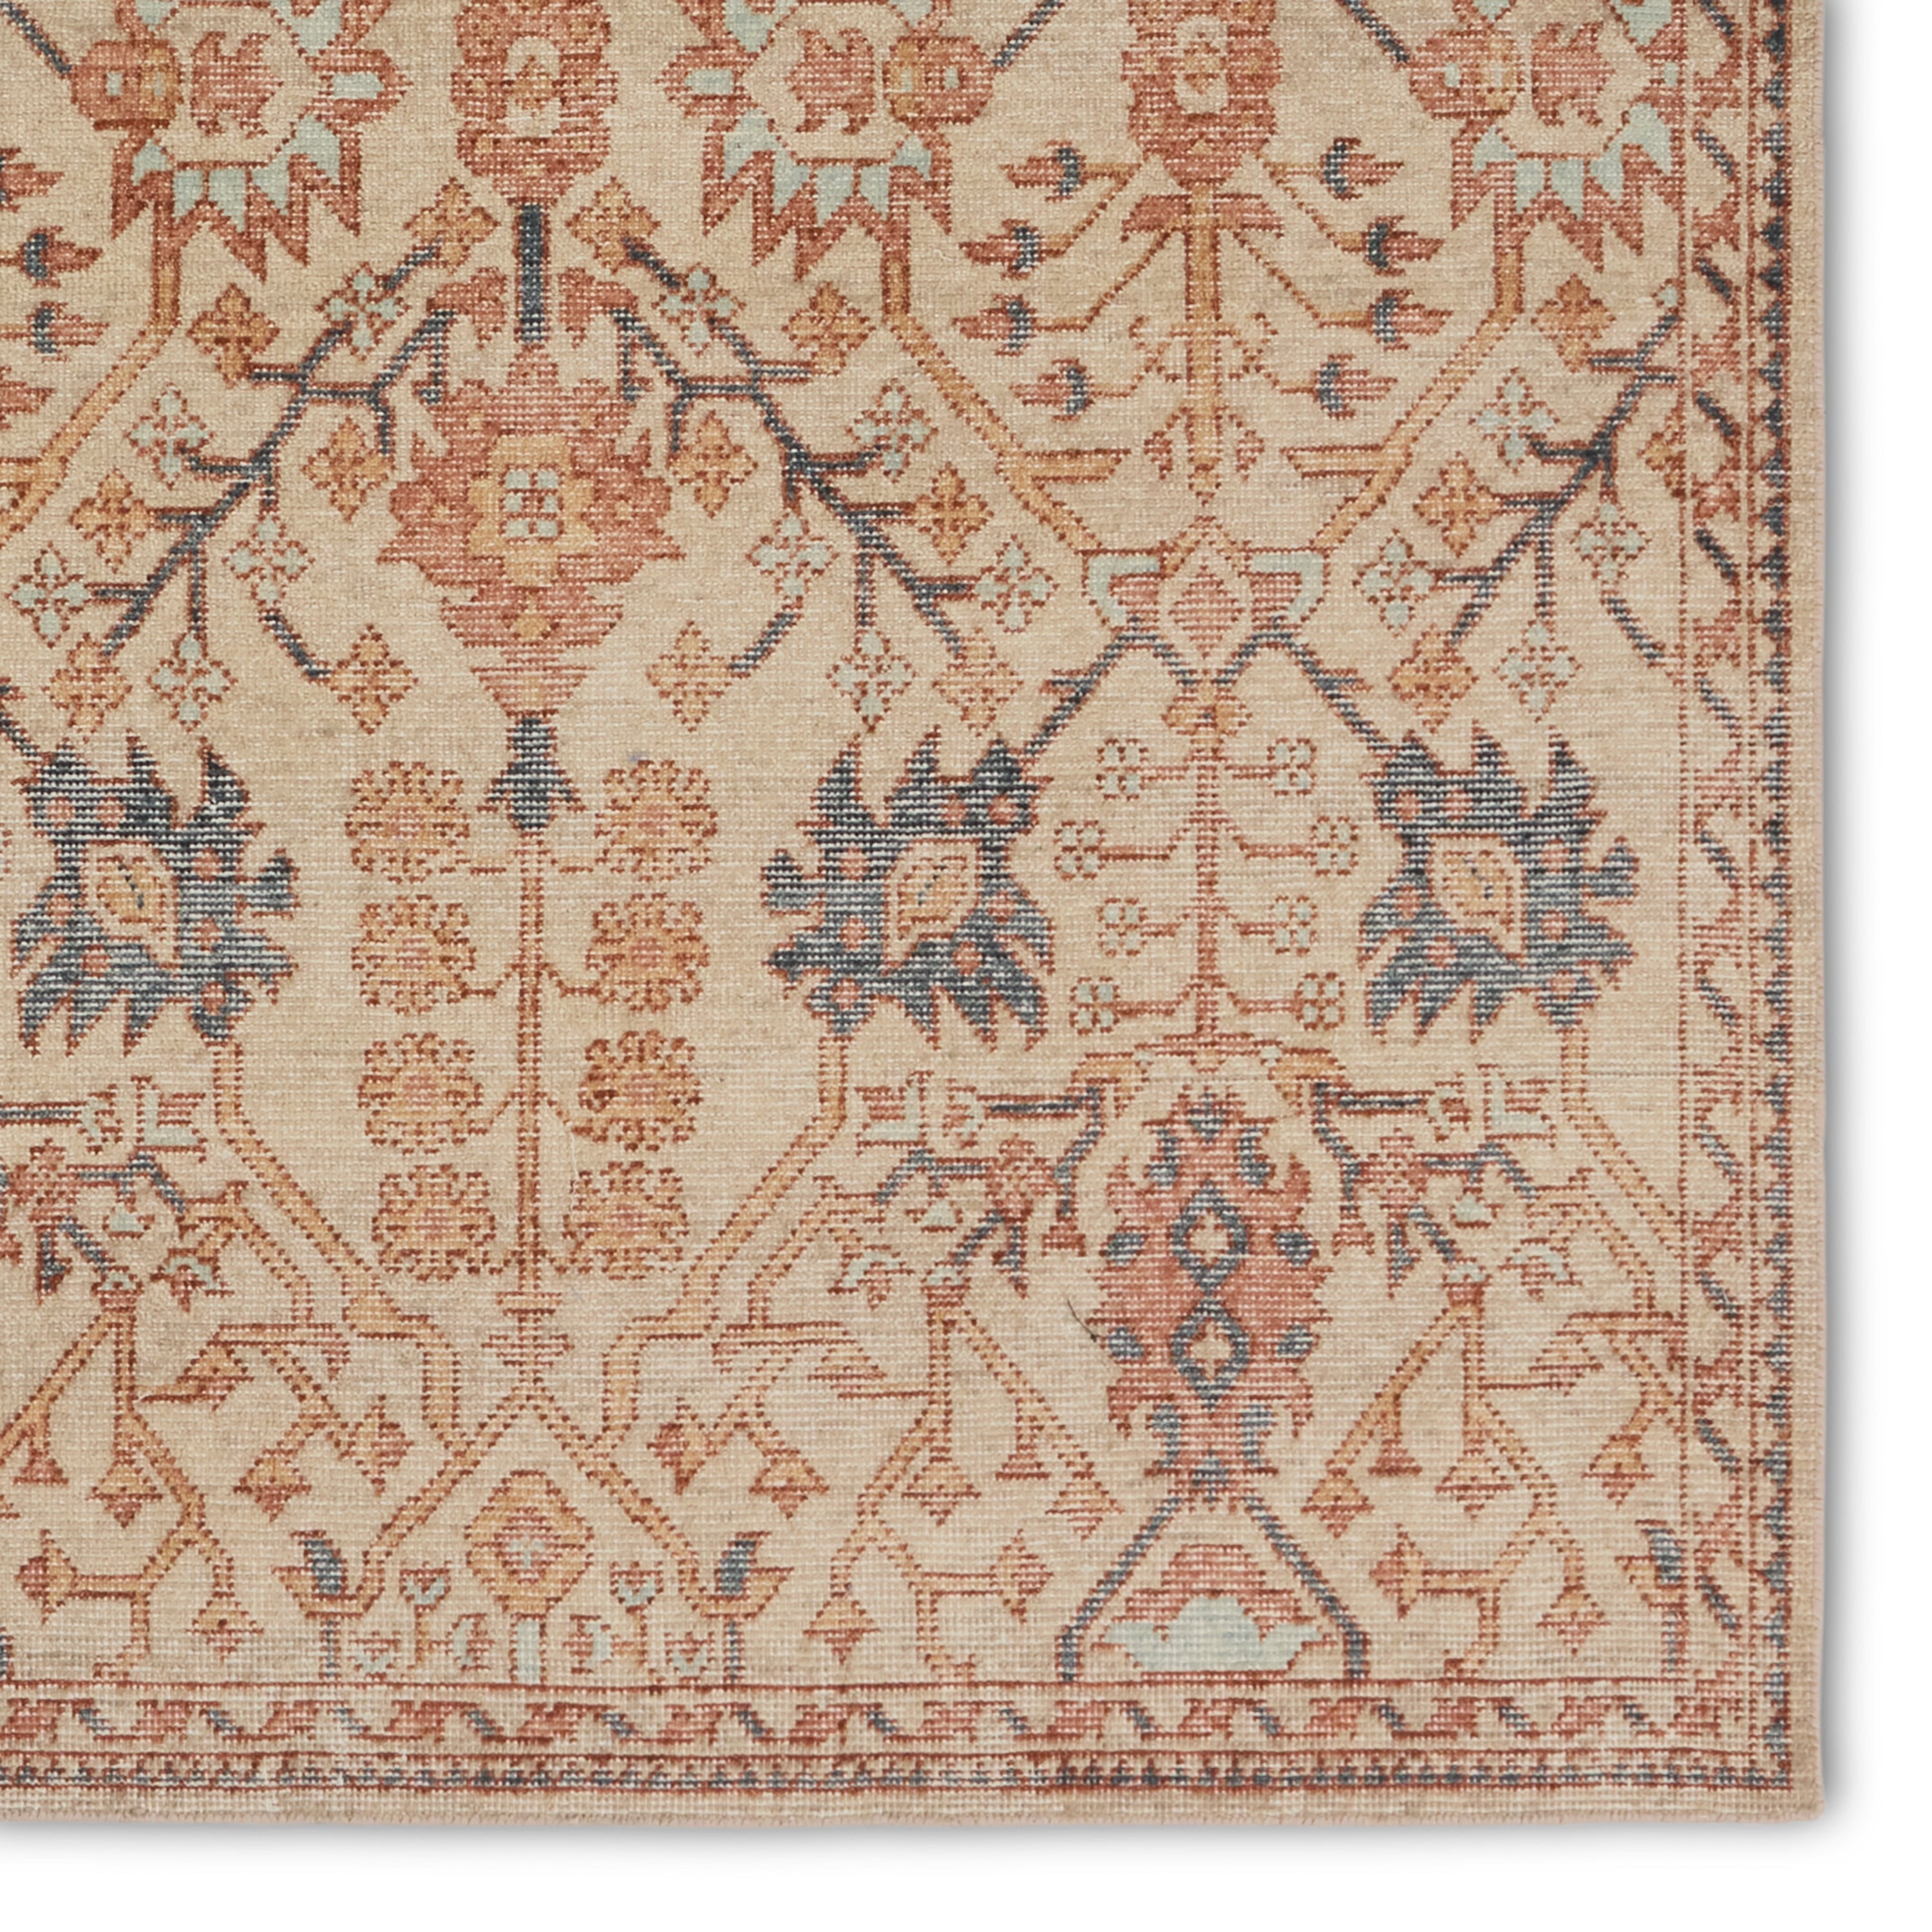 The Eden collection pairs fresh, vibrant colors with provincial Persian motifs for the perfect blend of new and time-honored. This hand-knotted wool rug features a hand-sheared quality that lends the design a perfectly vintage and a lovingly worn look. The earthy tones of the Solanine rug provide an inviting and grounding accent to any heavily trafficked and well-lived rooms in the home. Amethyst Home provides interior design, new construction, custom furniture, and area rugs in the Miami metro area.